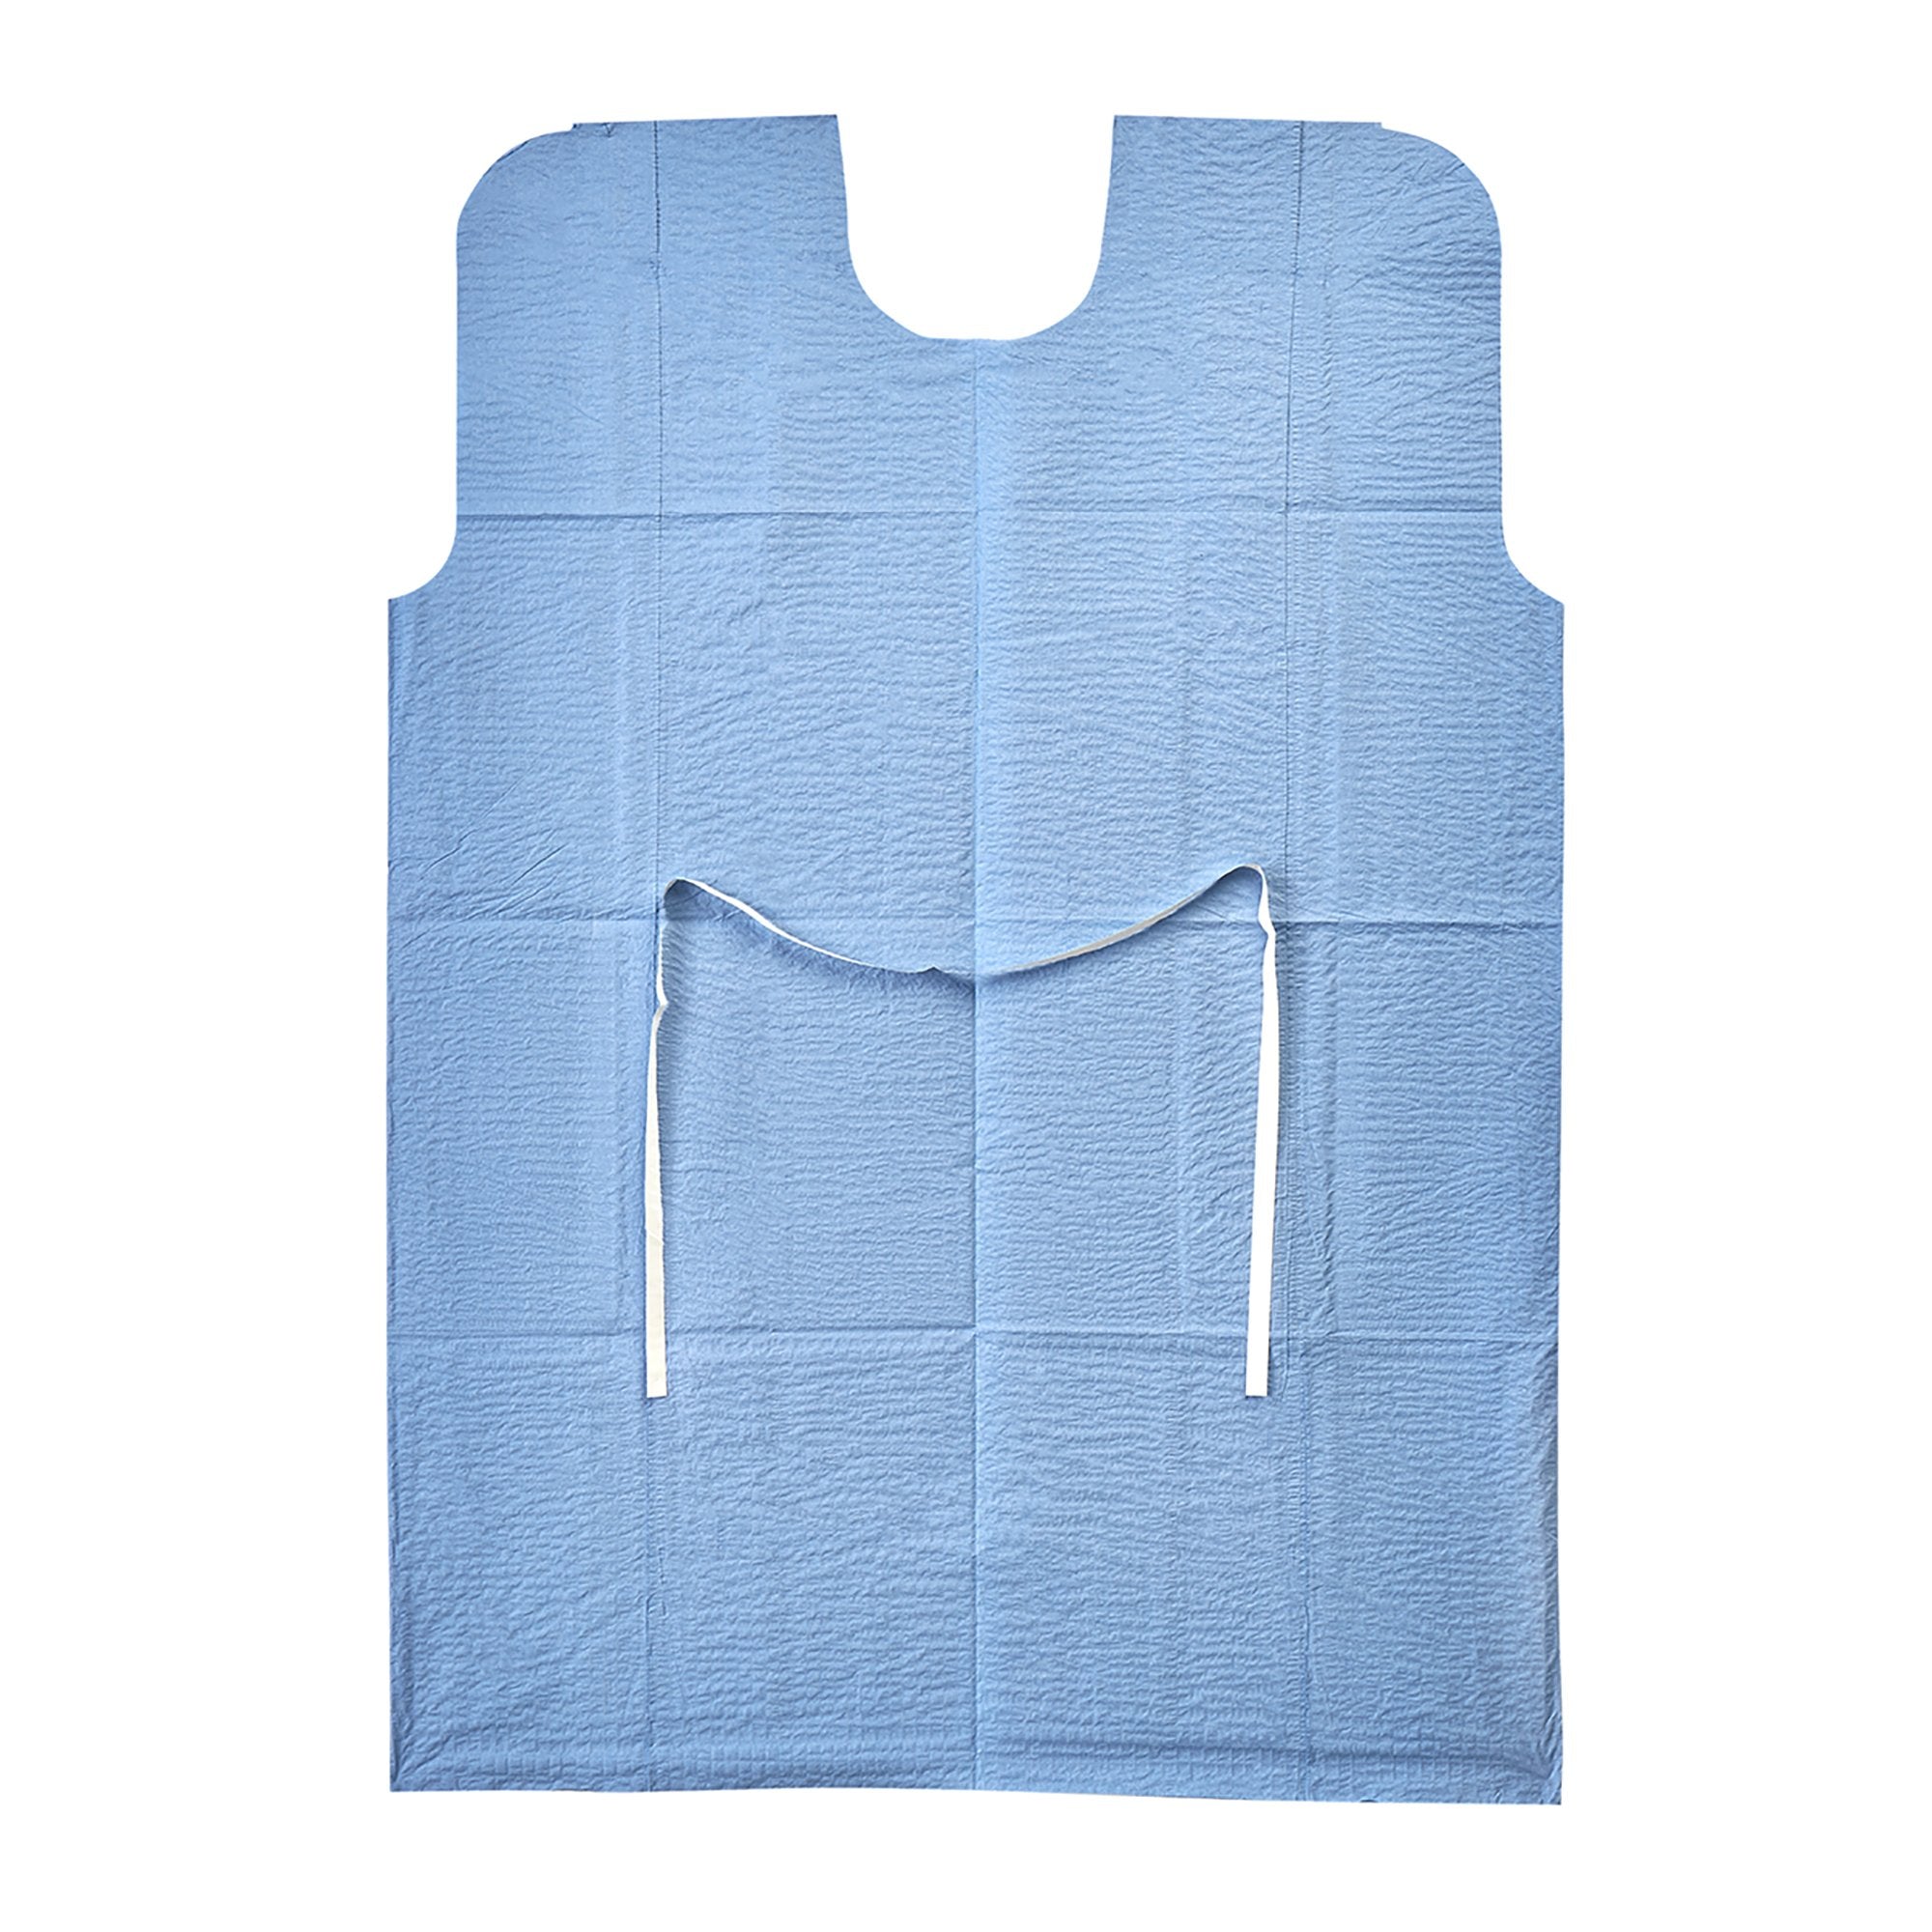 Graham Medical Products Patient Exam Gown Sleeveless Waist Tie, Medium/Large, Blue -Case of 50